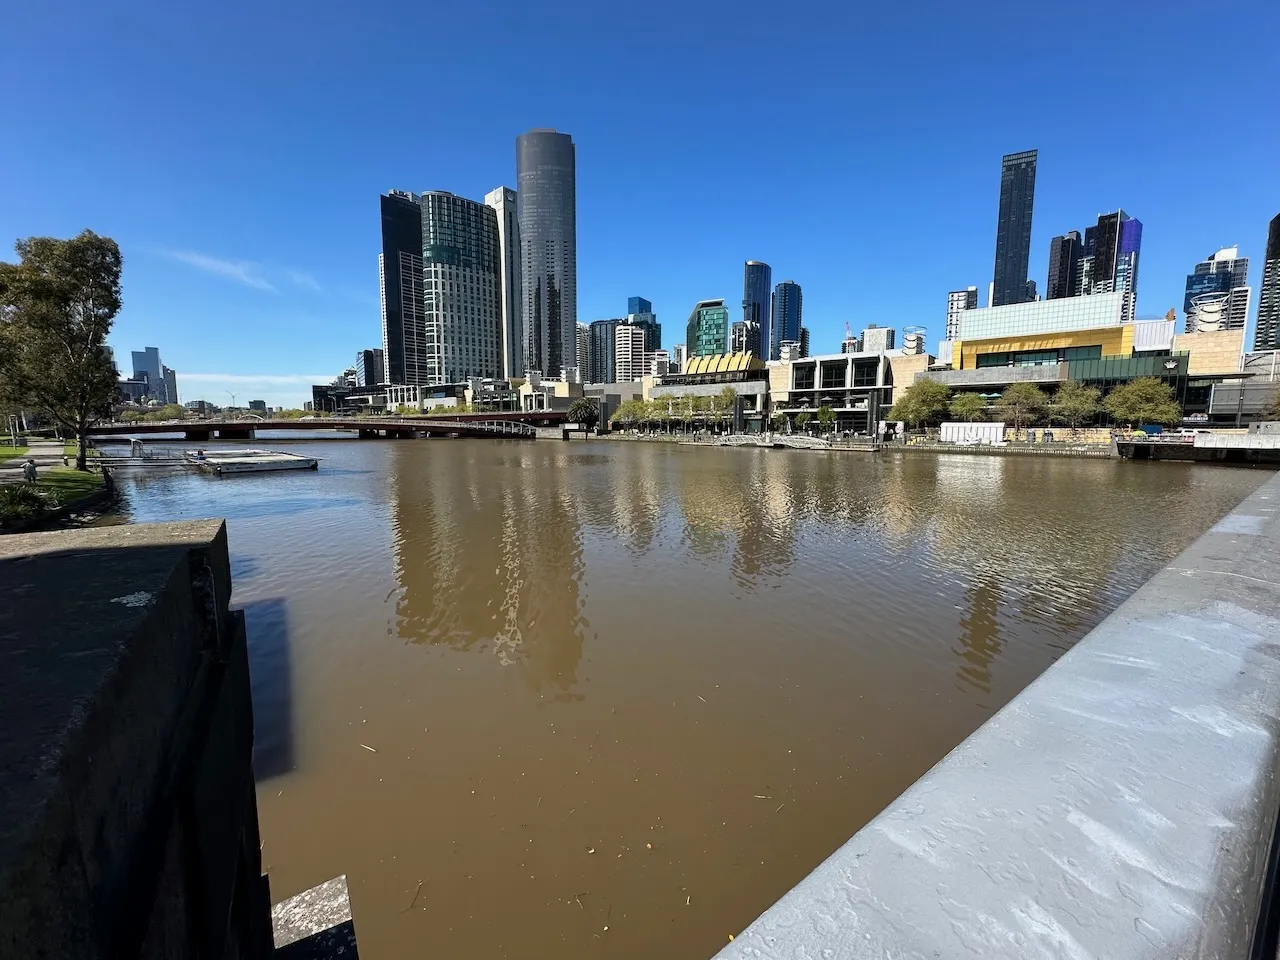 The Yarra river in all its disgusting glory